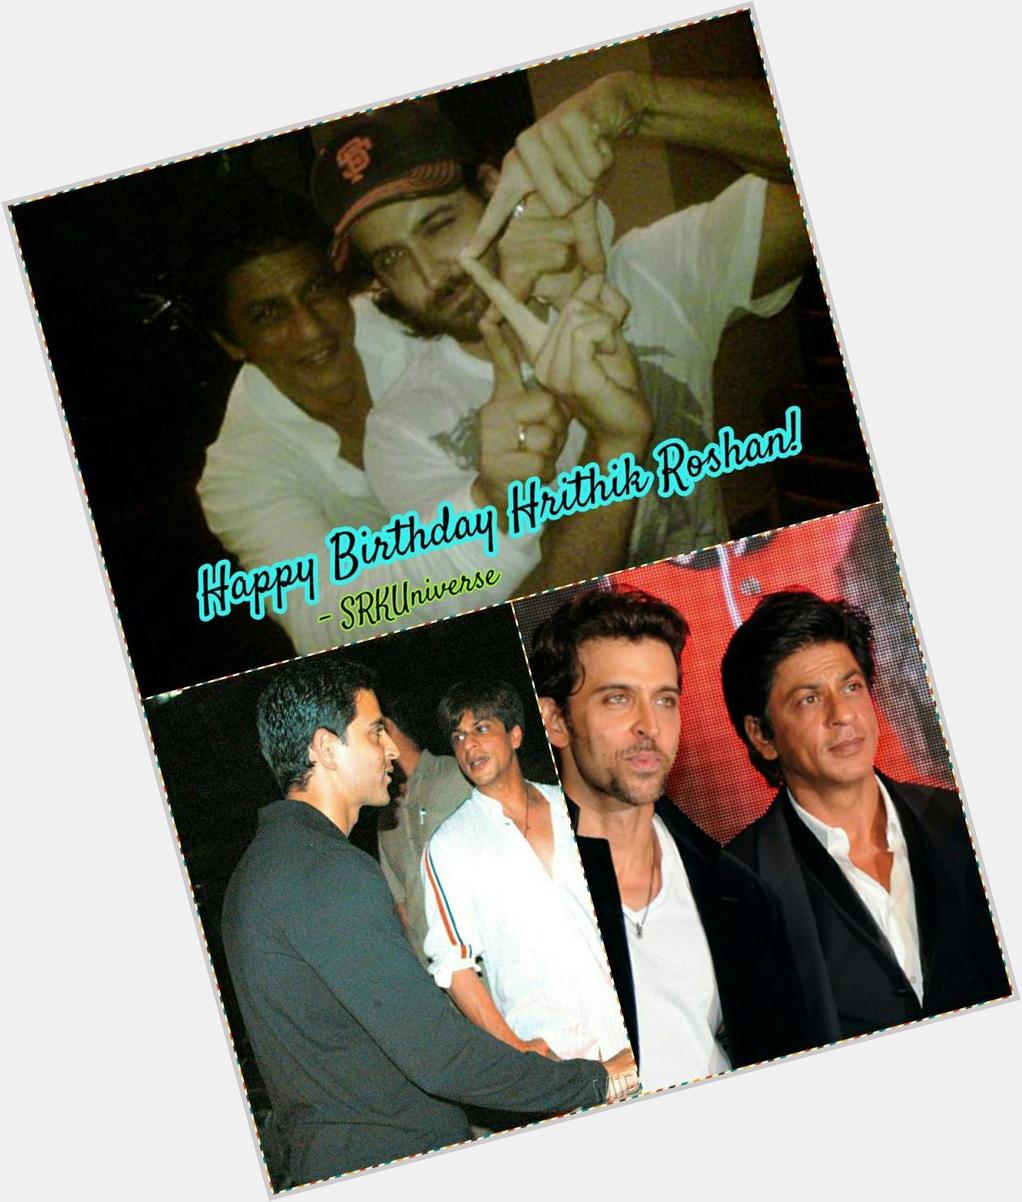 Happy Birthday Hrithik Roshan on behalf of all SRKians. Have a prosperous and happy year!
- 